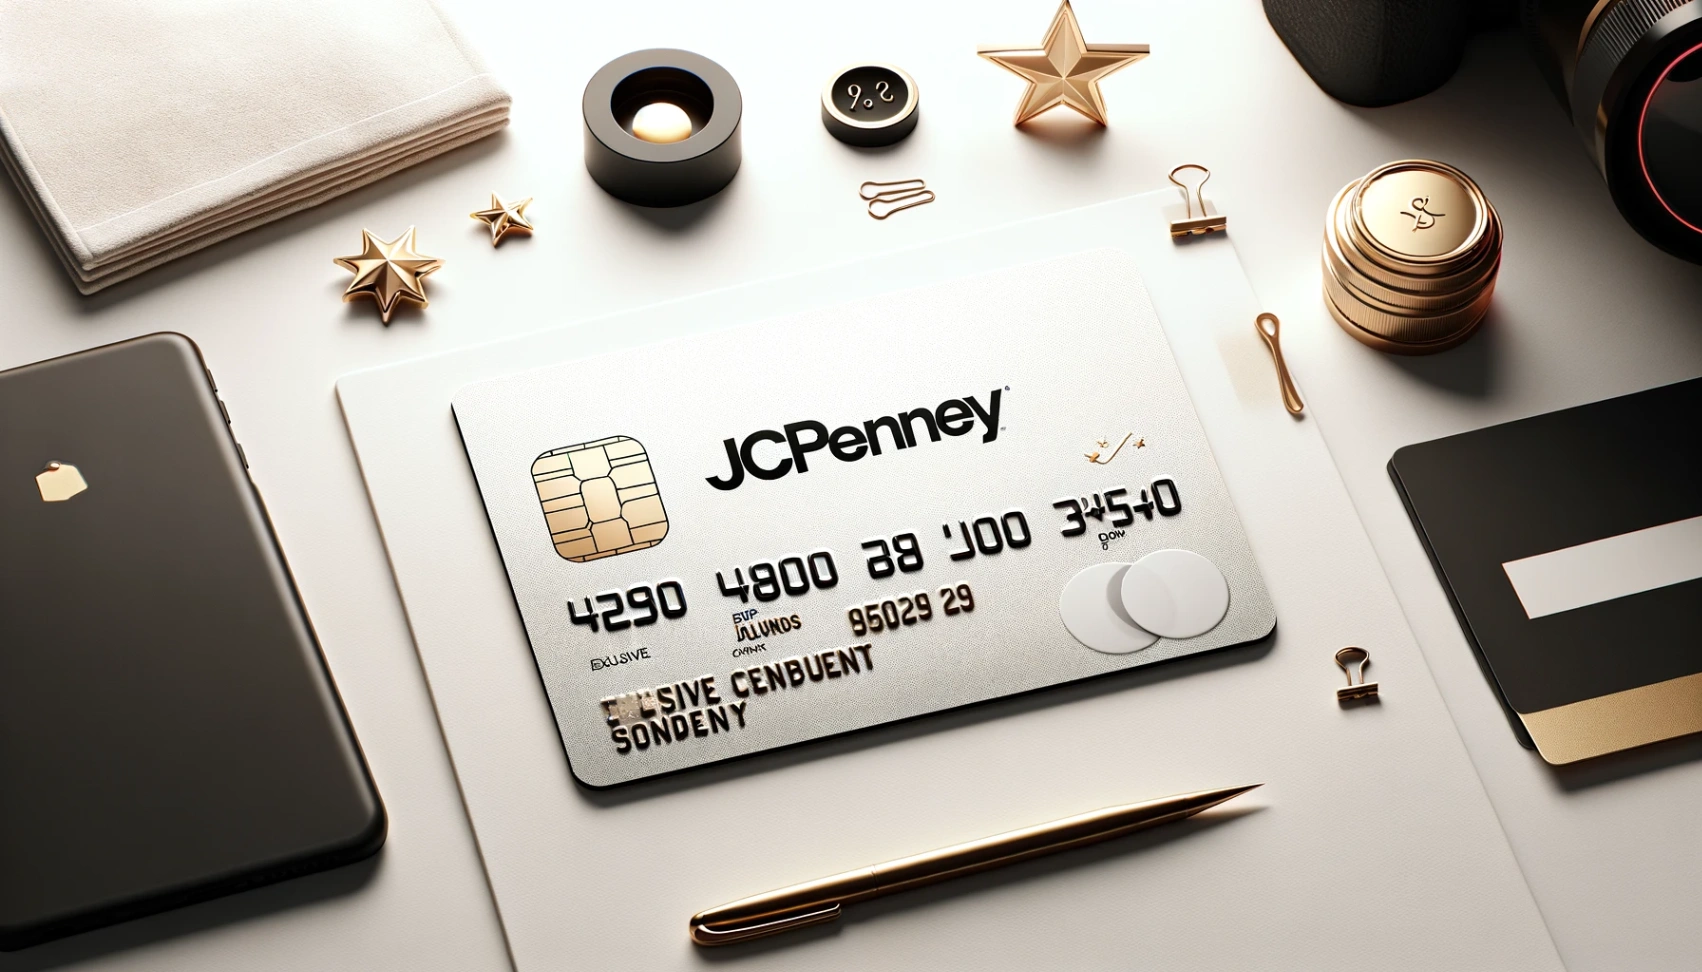 Learn How To Apply for JCPenney Credit Card